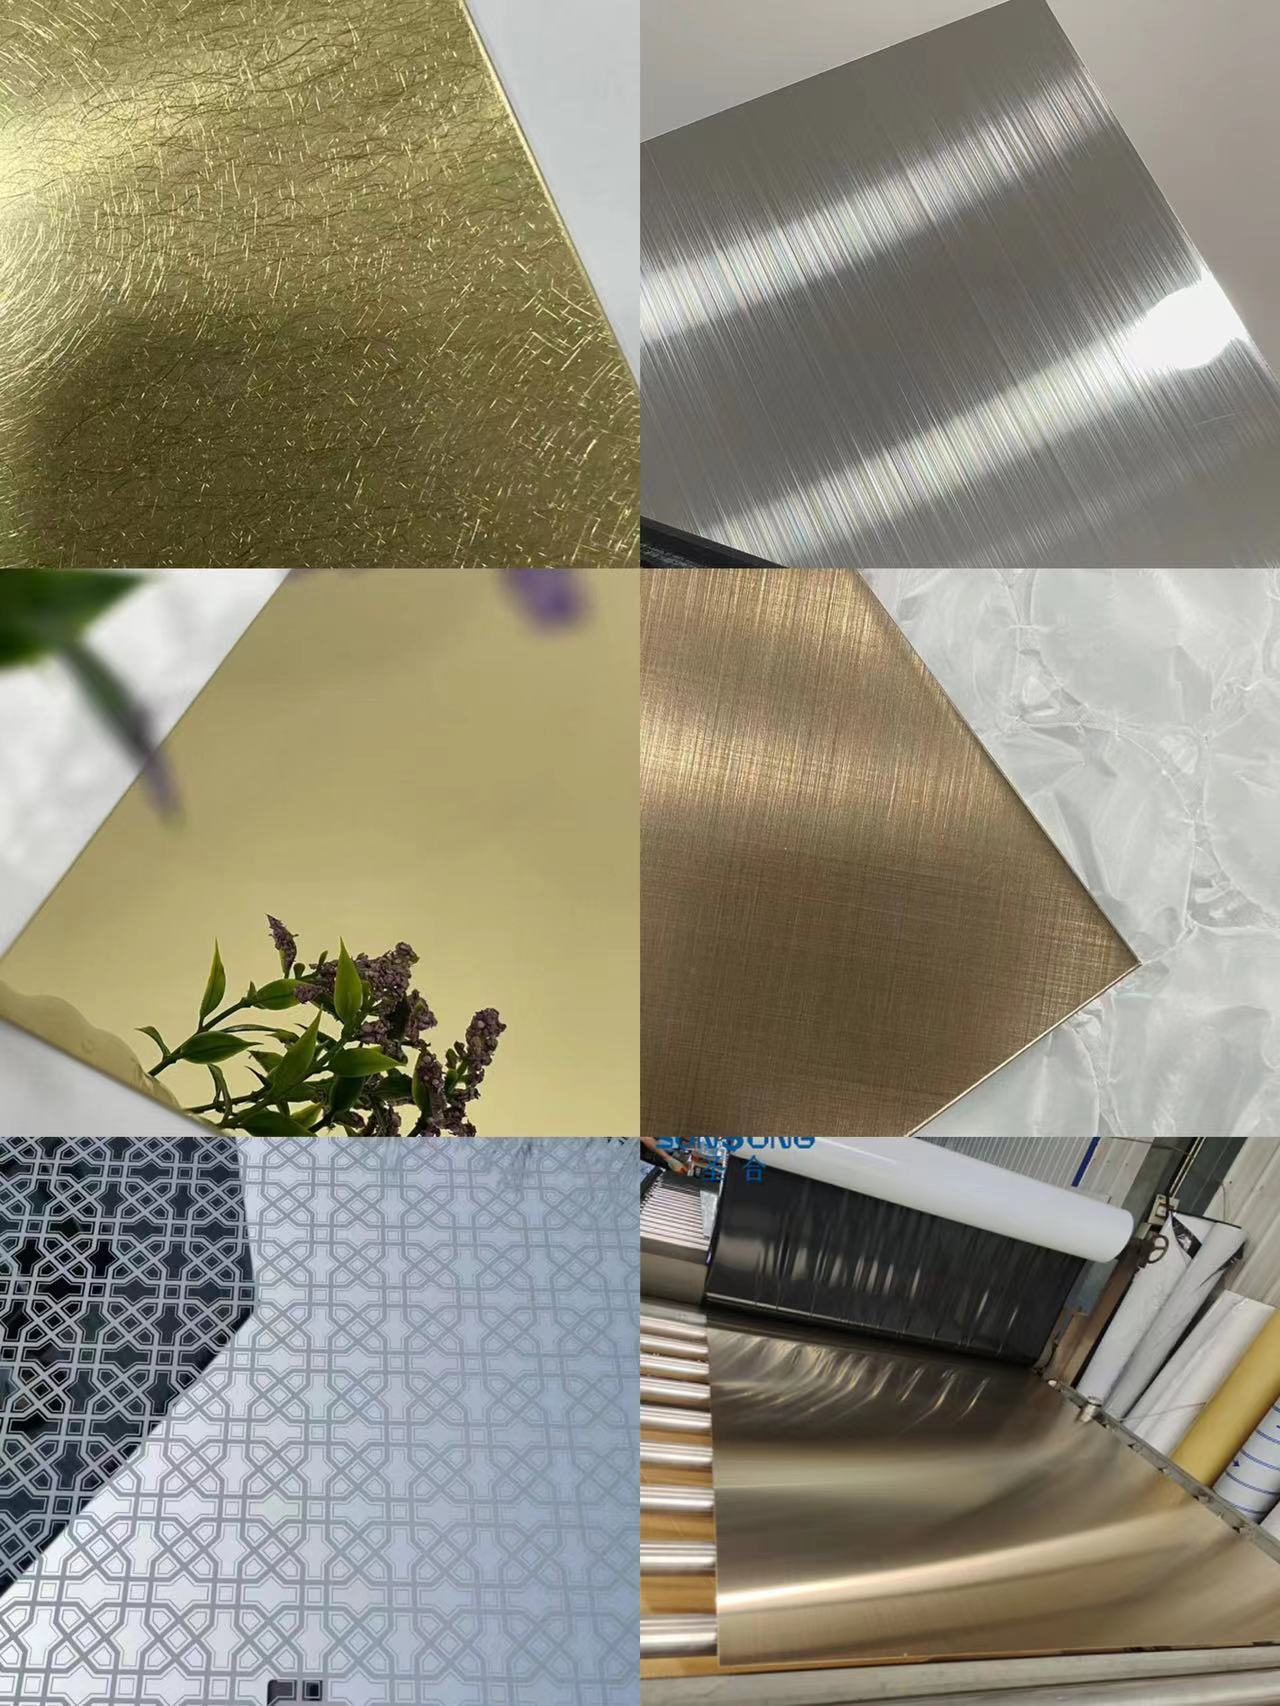 Different surfaces of stainless steel sheet